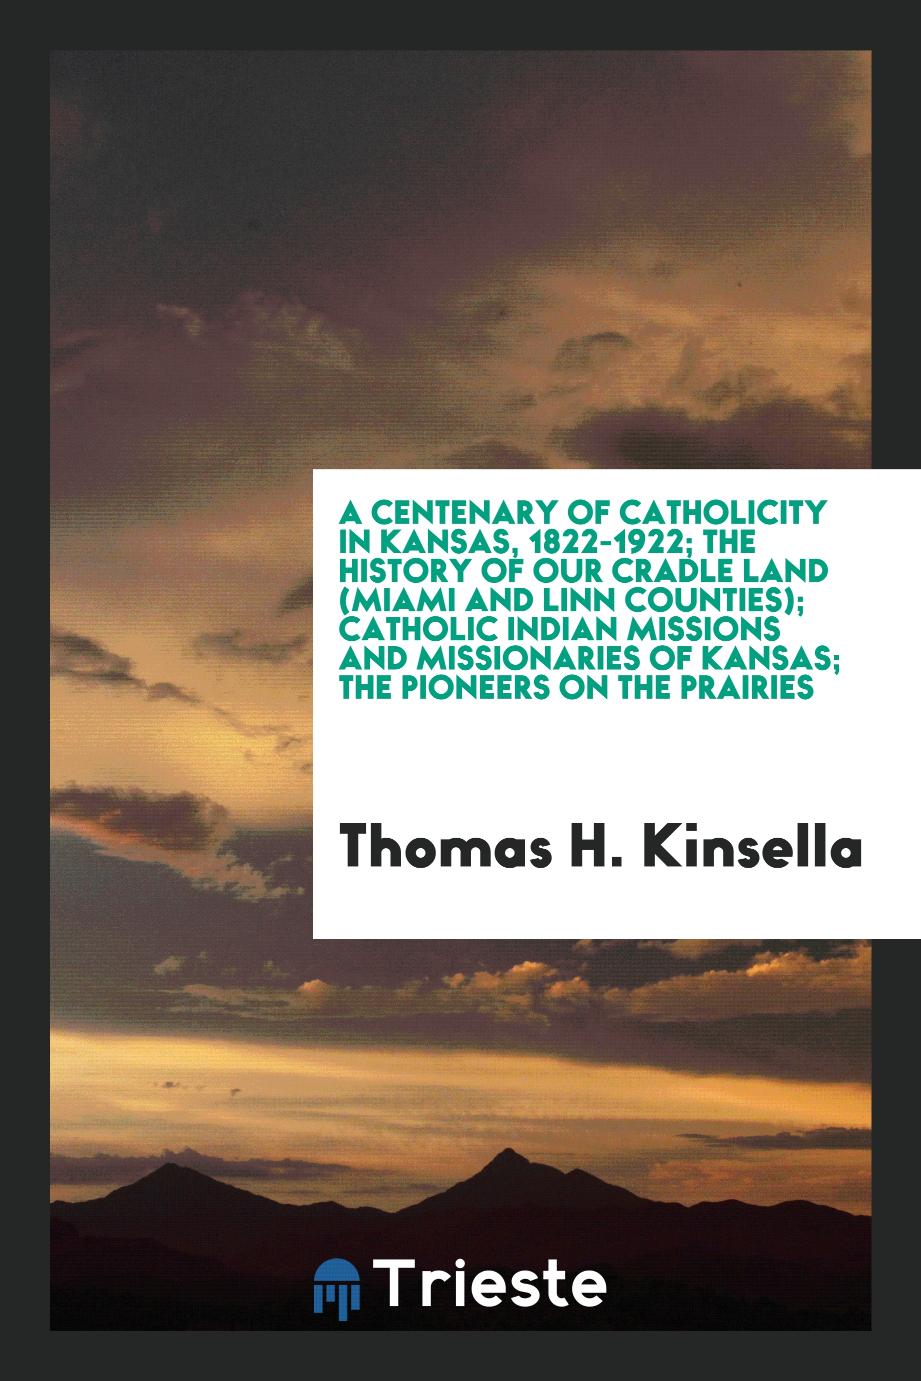 A centenary of Catholicity in Kansas, 1822-1922; the history of our cradle land (Miami and Linn Counties); Catholic Indian missions and missionaries of Kansas; The pioneers on the prairies